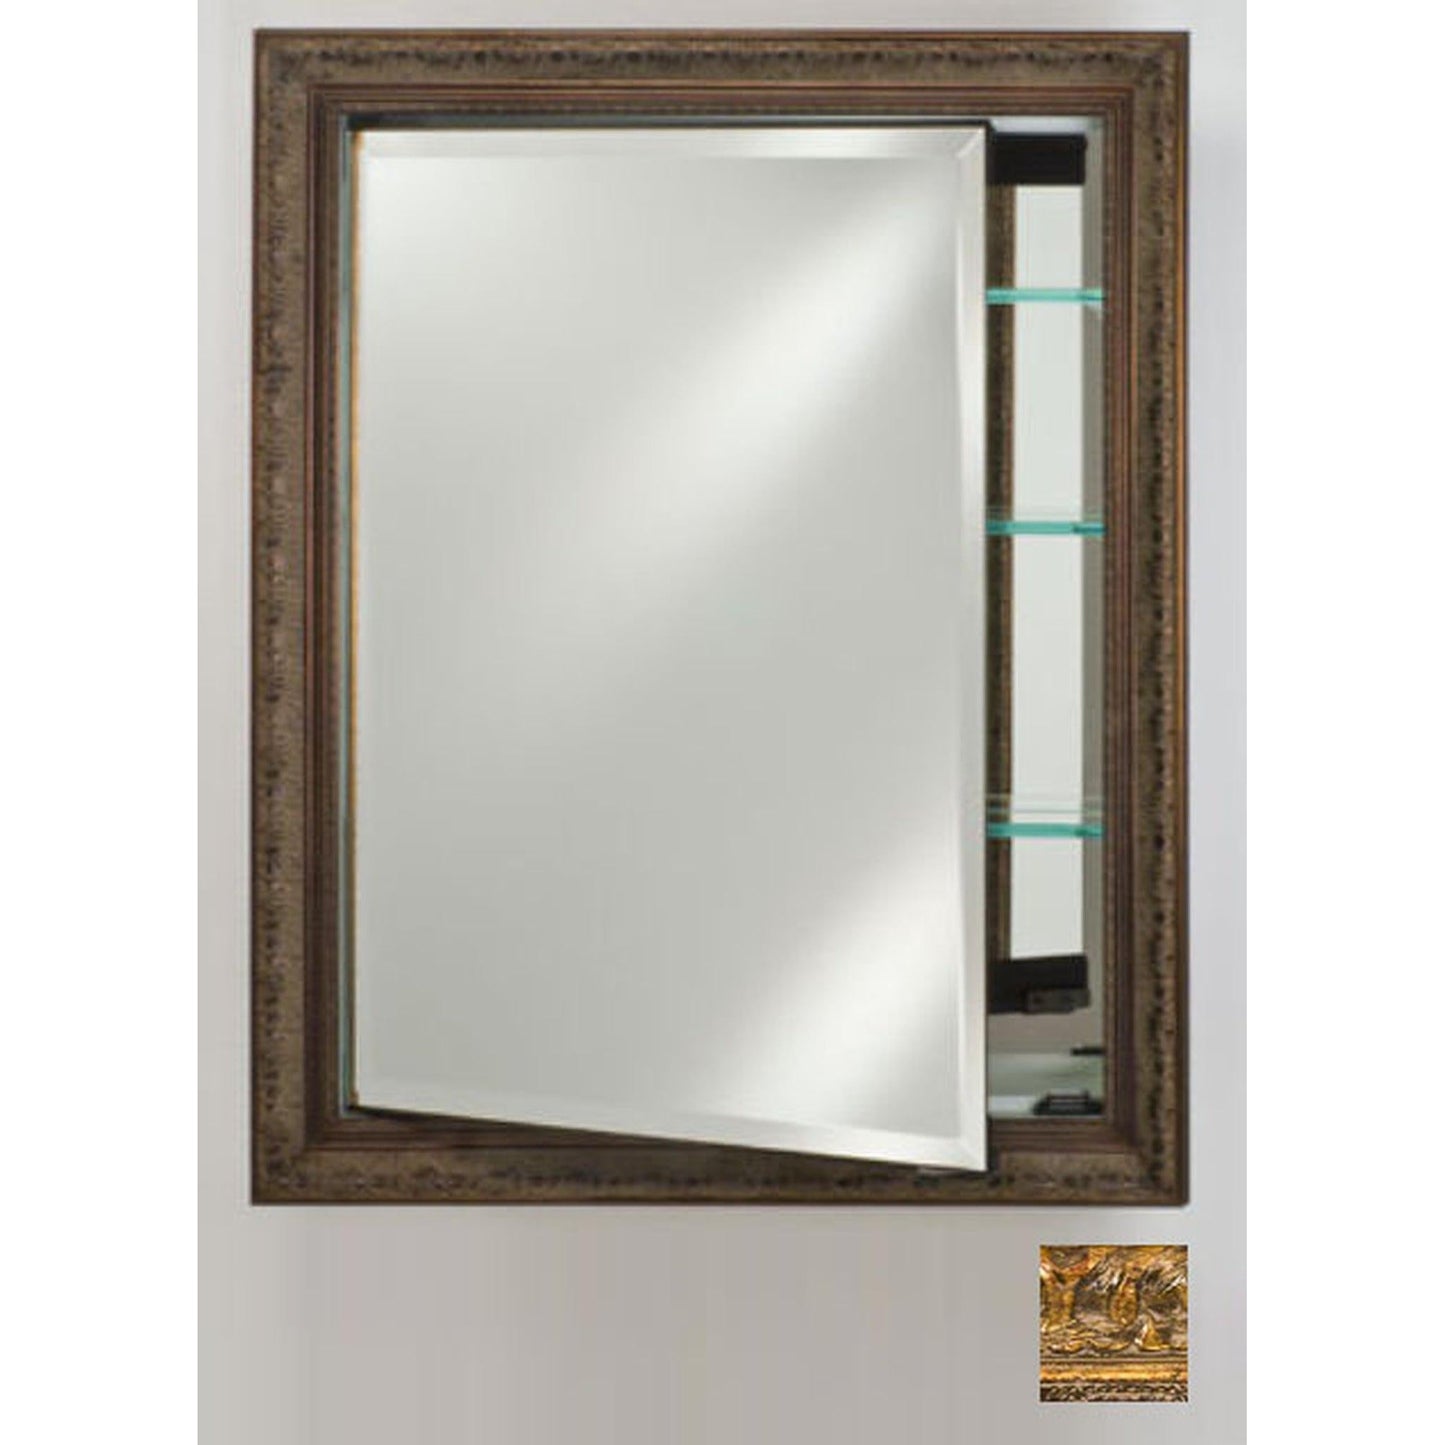 Afina Signature 24" x 36" Tuscany Antique Gold Recessed Reversible Hinged Single Door Medicine Cabinet With Beveled Edge Mirror